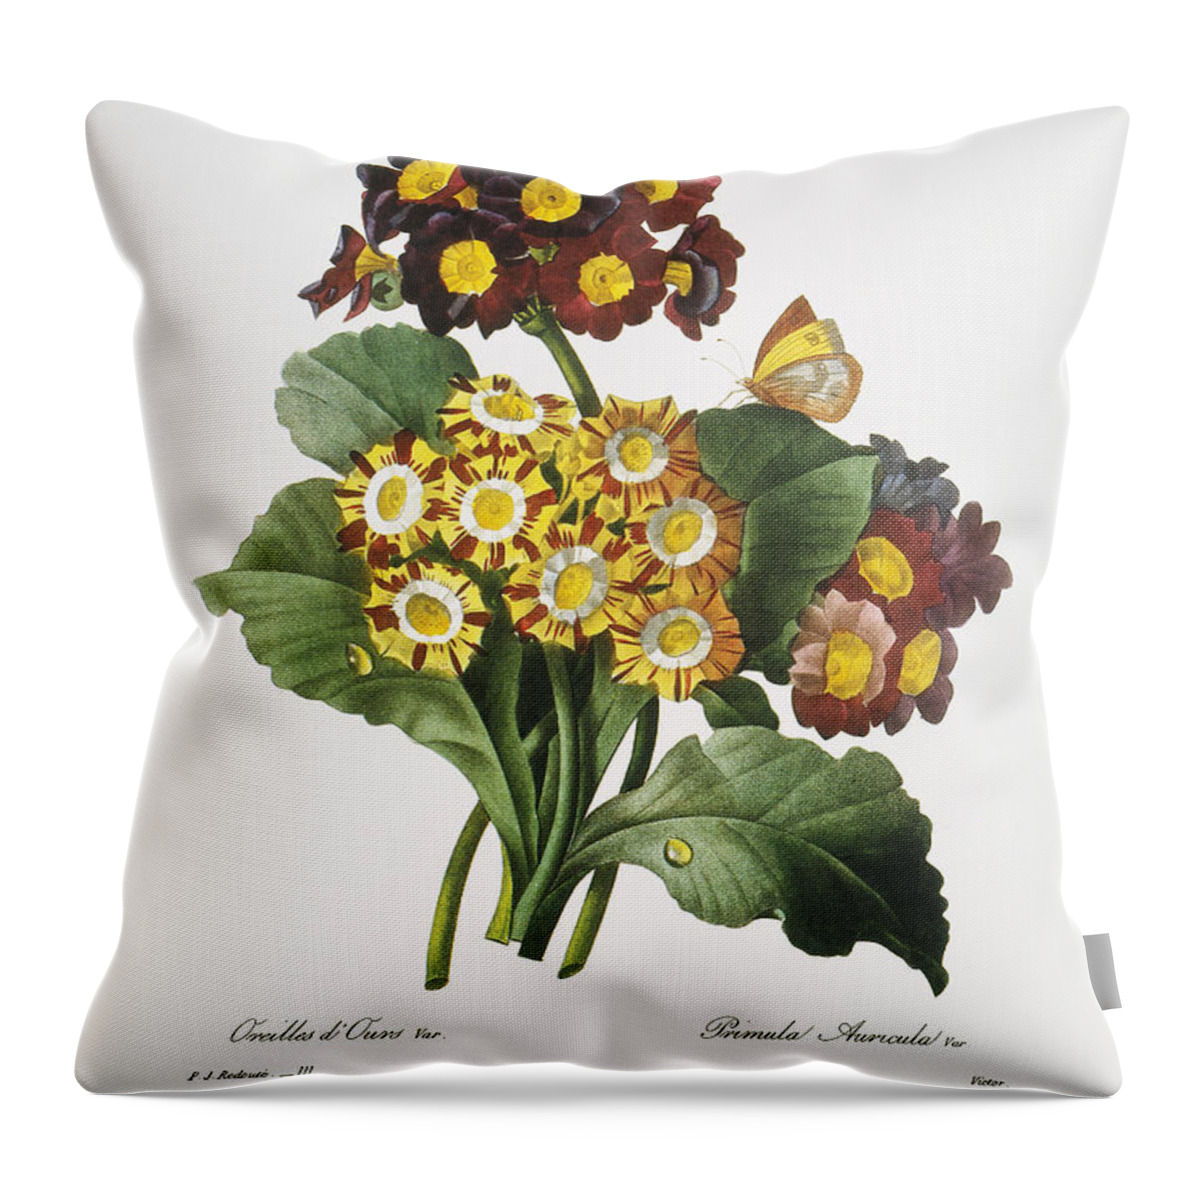 1833 Throw Pillow featuring the photograph Redoute: Auricula, 1833 by Granger